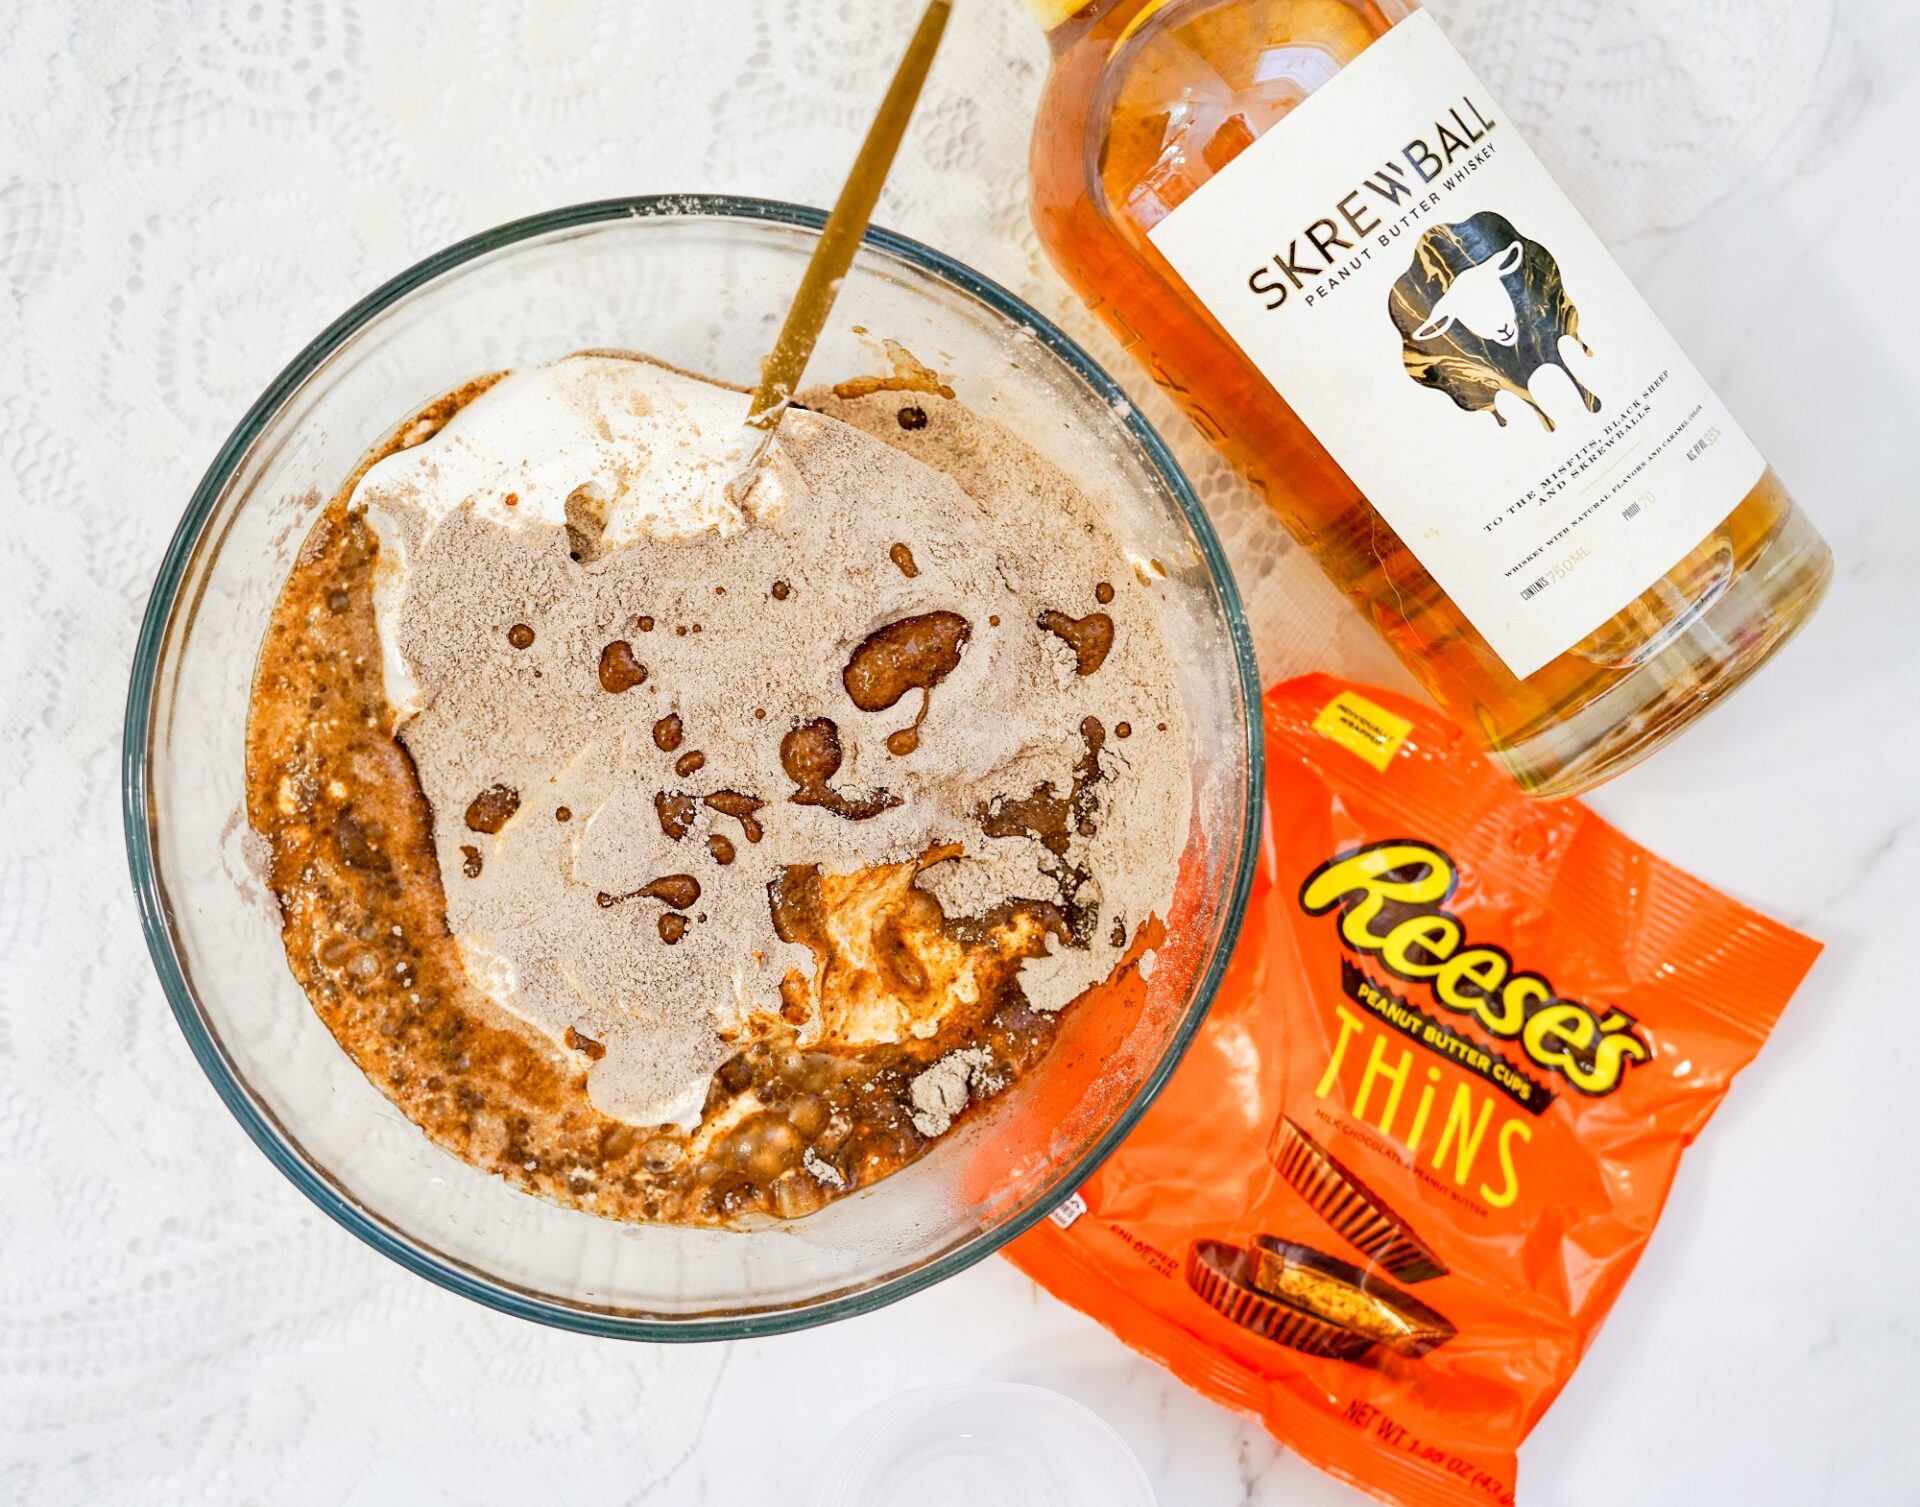 Mixing together whiskey, pudding mix, and whipped topping in a glass bowl.